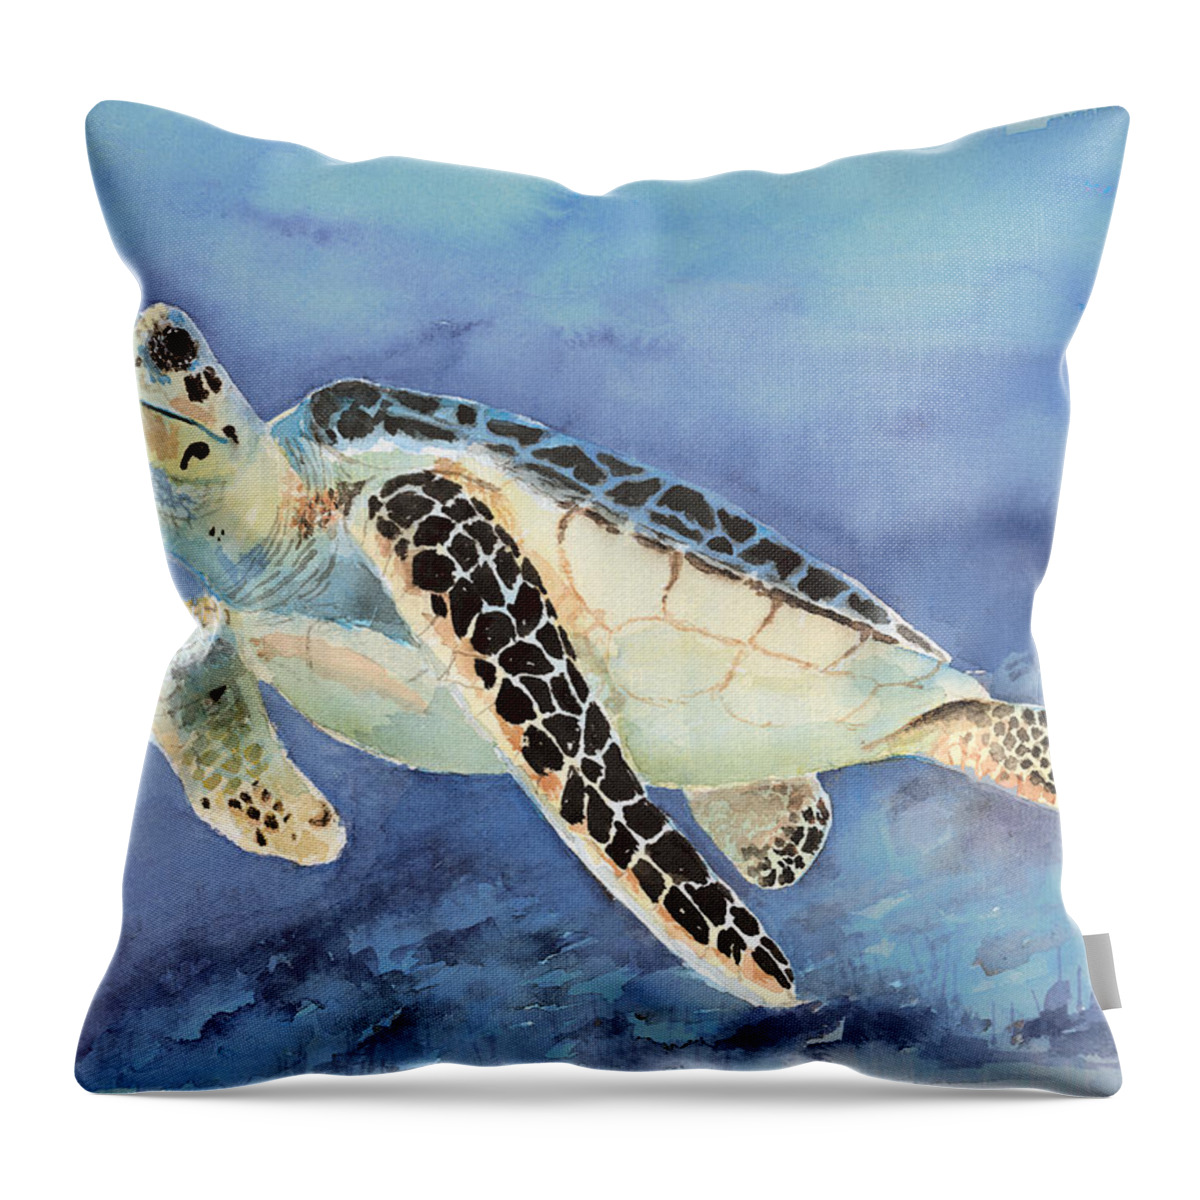 Green Sea Turtle Throw Pillow featuring the painting Sea Turtle by Arline Wagner